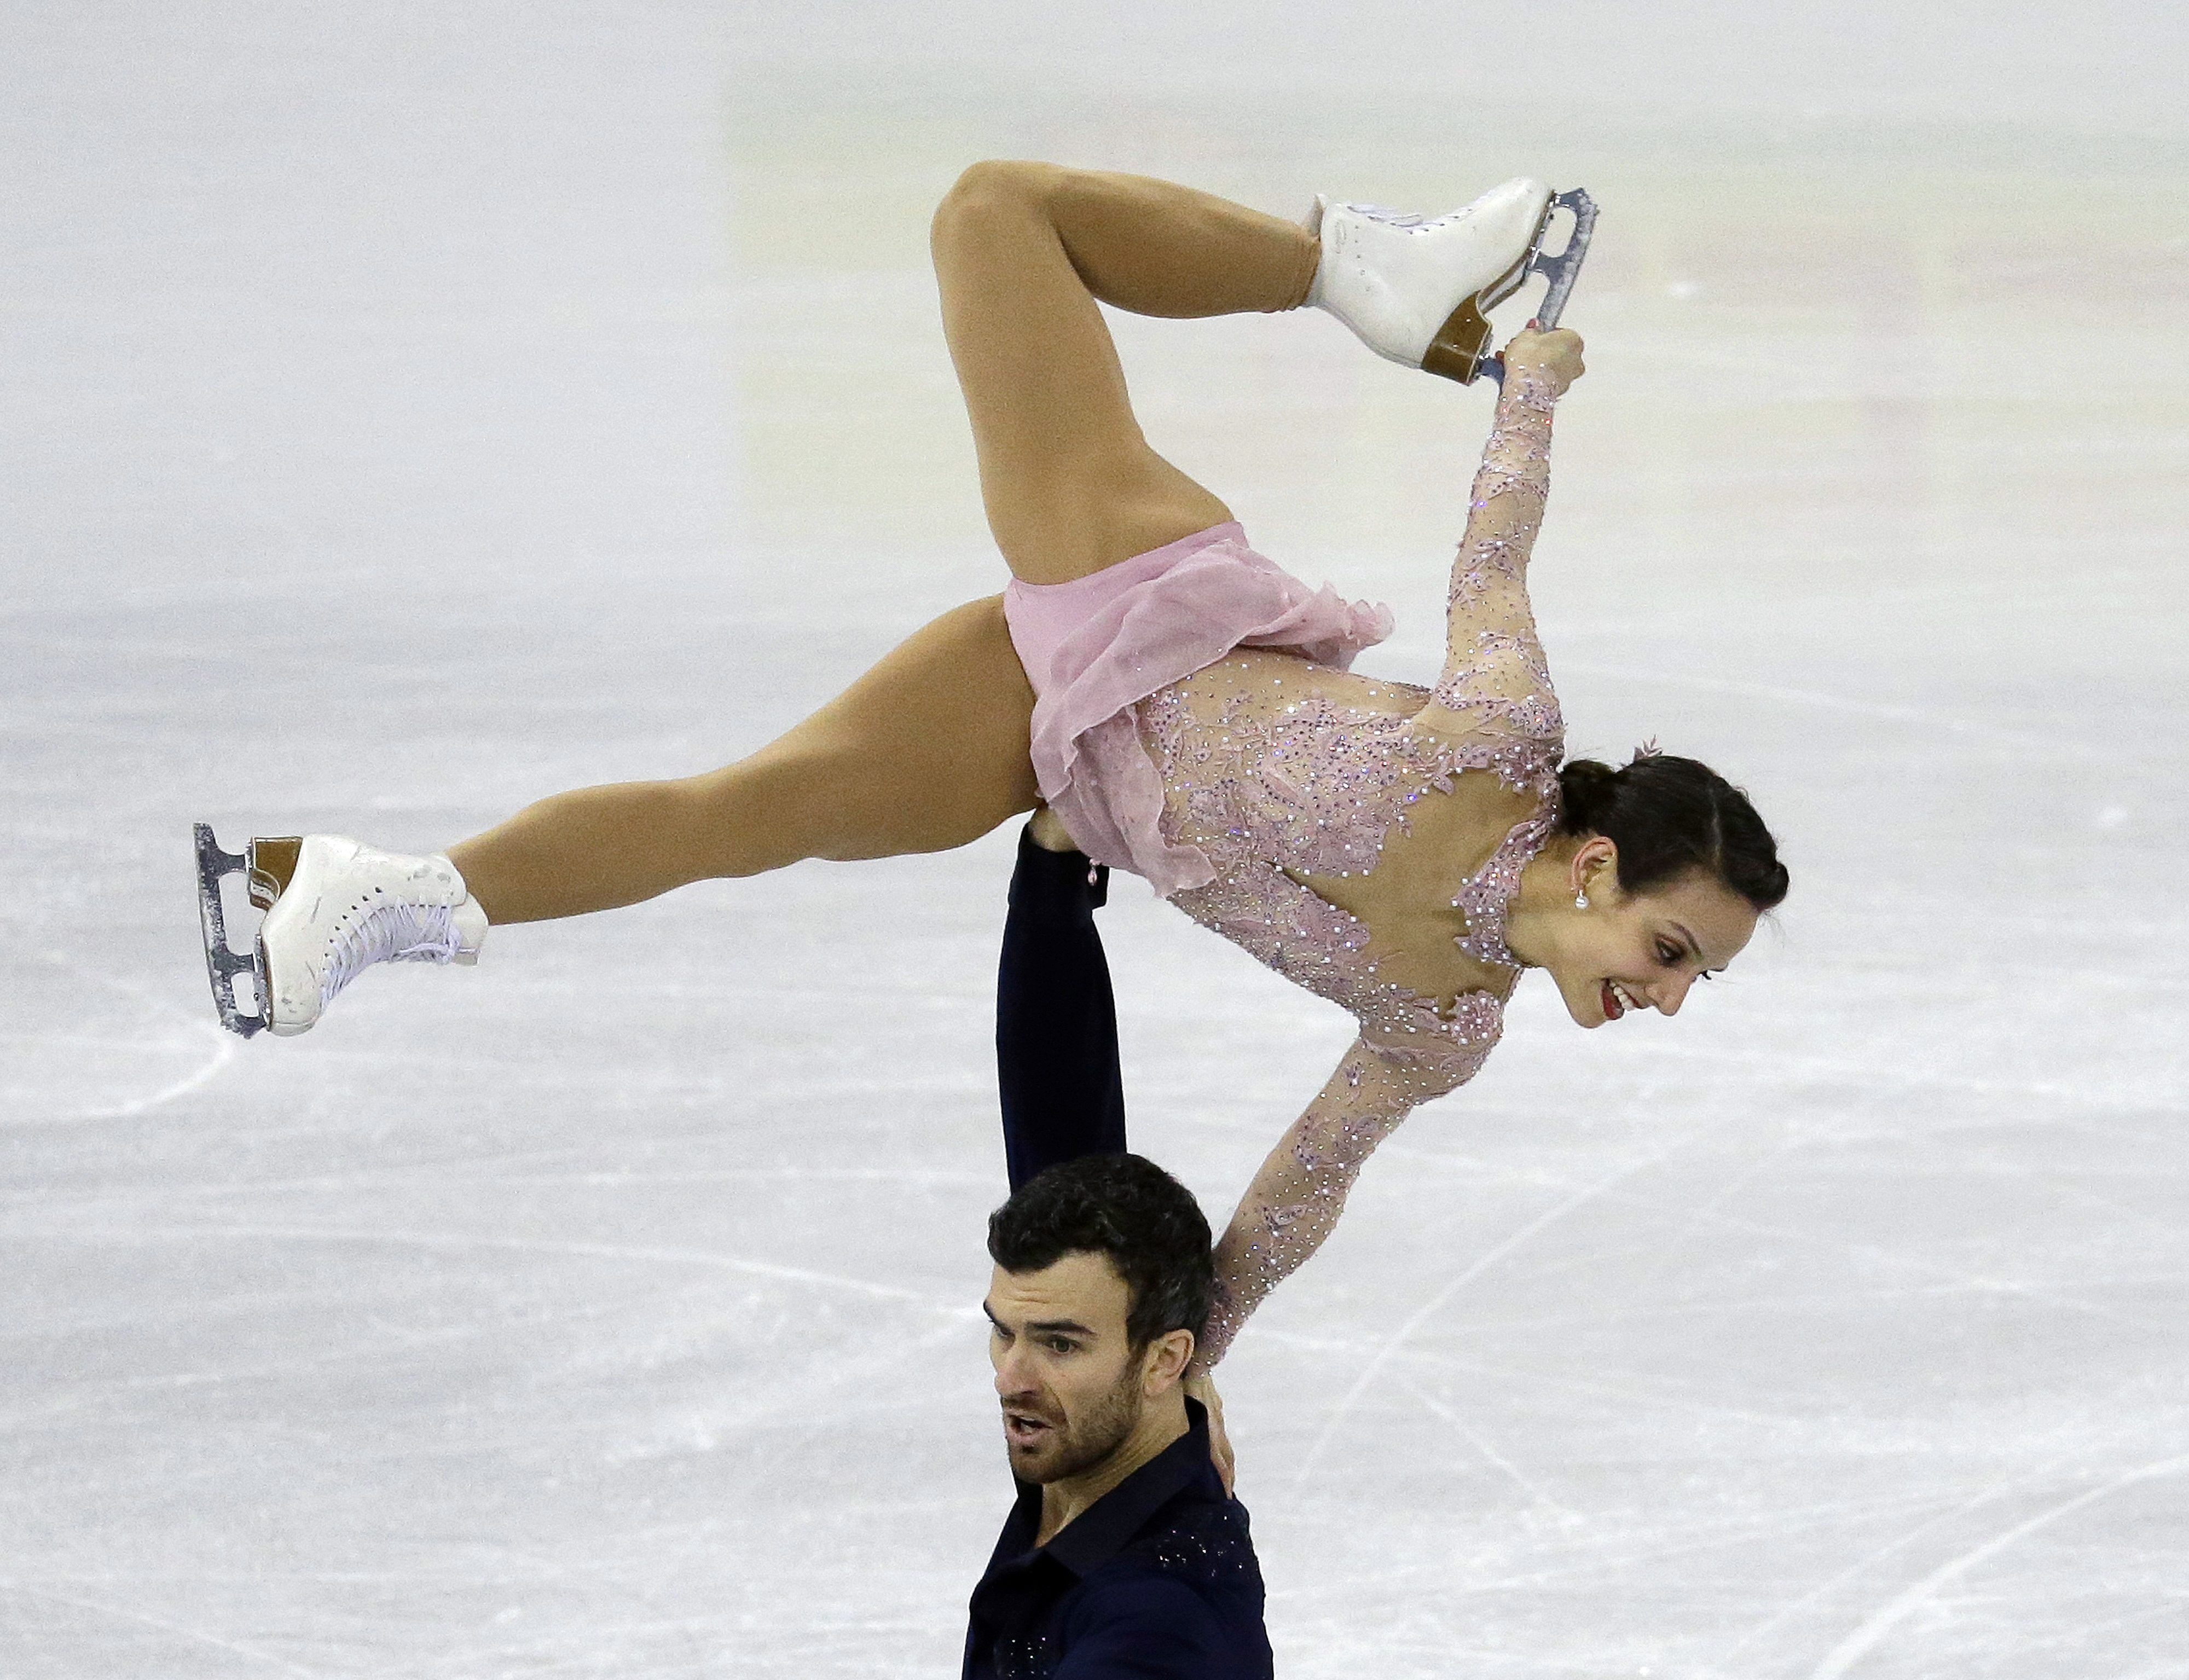 Silver medalists Meagan Duhamel and Eric Radford of Canada perform in the Pairs Free Skating at the ISU Four Continents Figure Skating Championships in Gangneung, South Korea, Saturday, Feb. 18, 2017. (AP Photo/Ahn Young-joon)